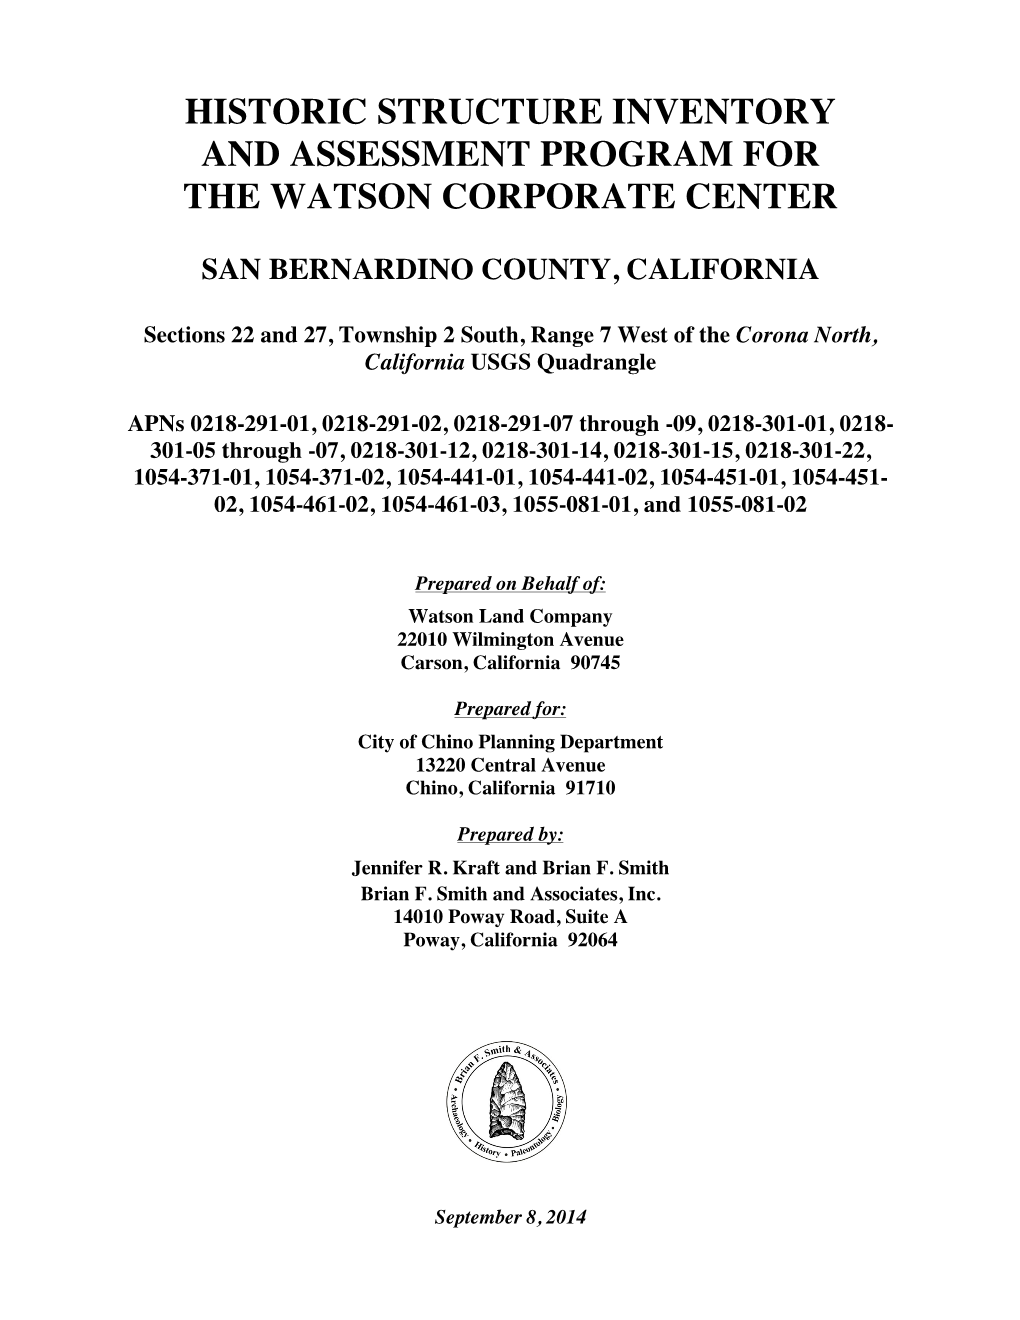 Historic Structure Inventory and Assessment Program for the Watson Corporate Center